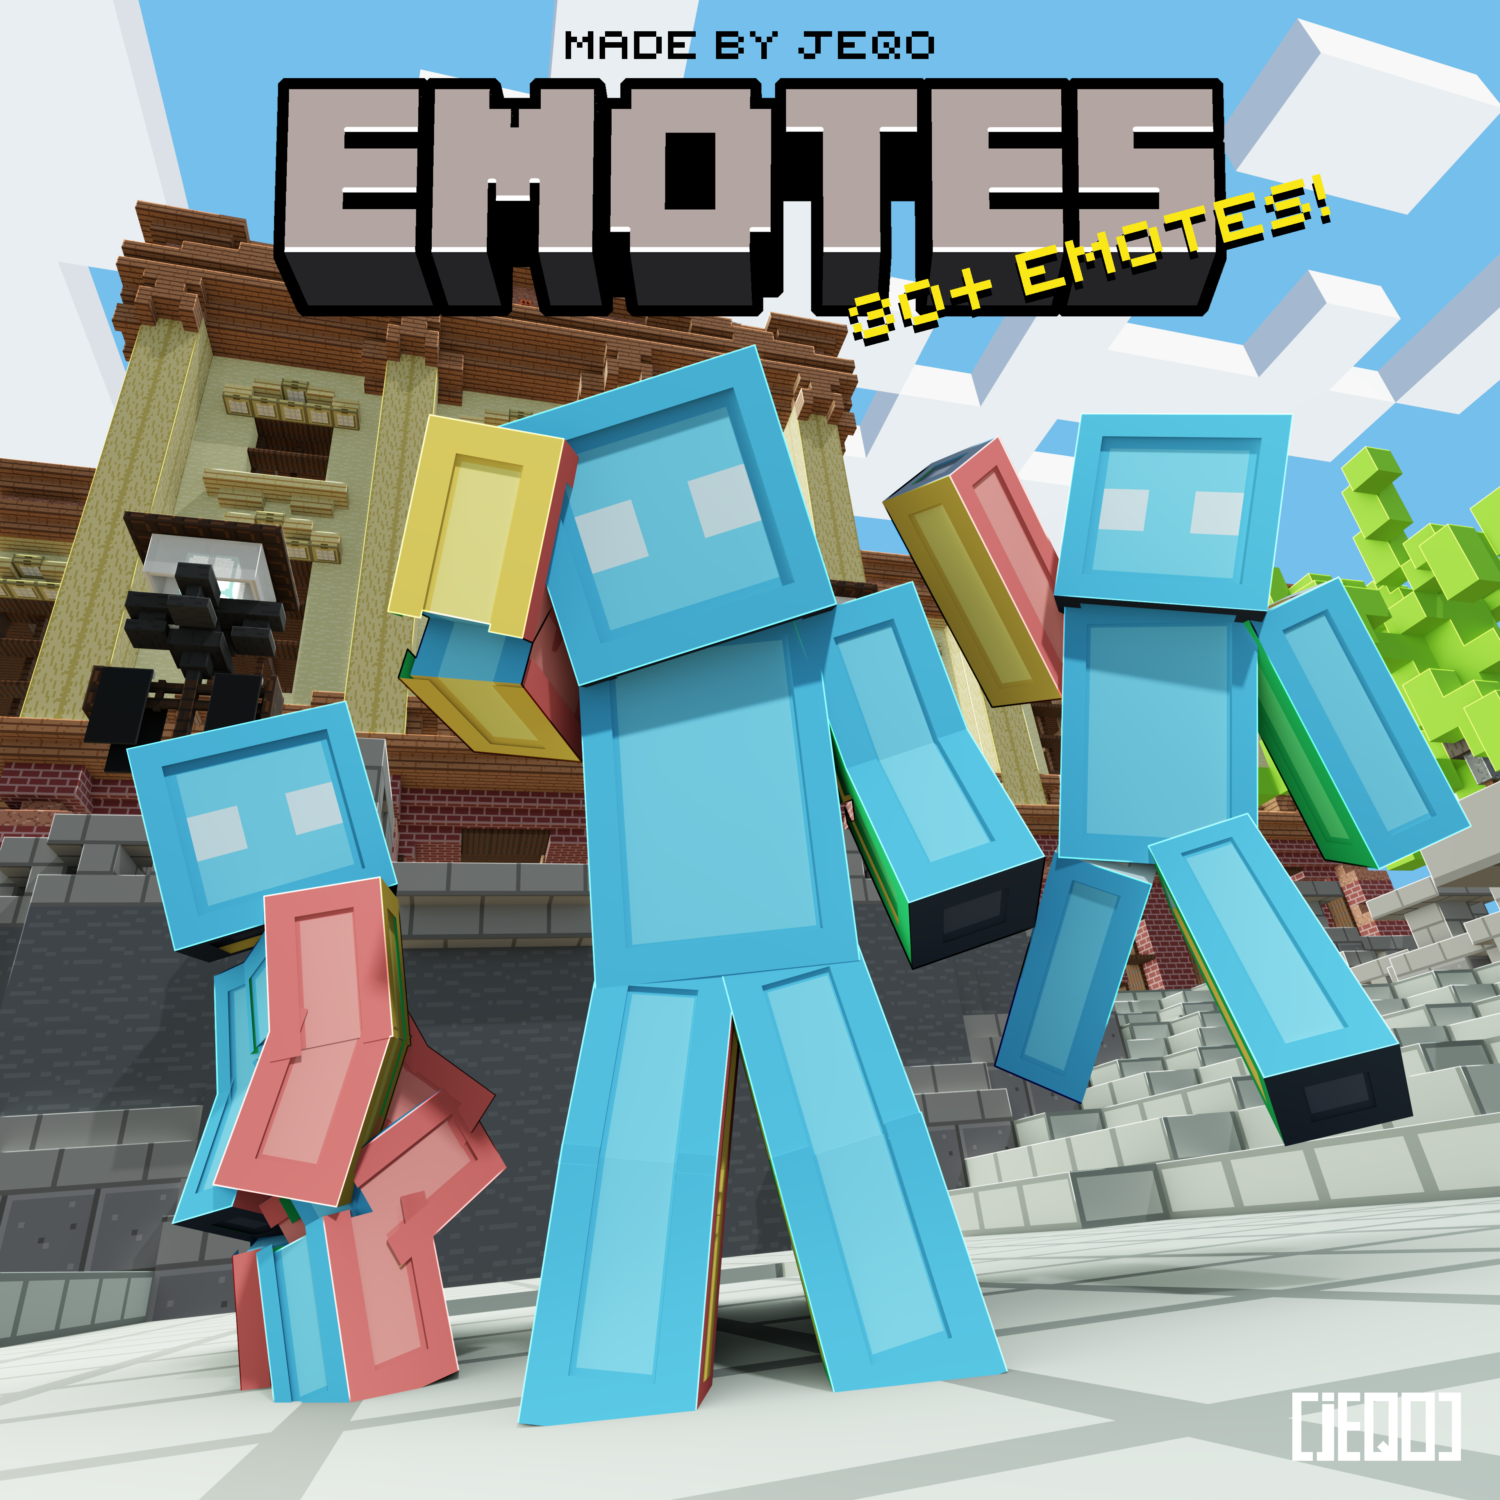 emotes-pack-by-jeqo-1500x1500 (1).png